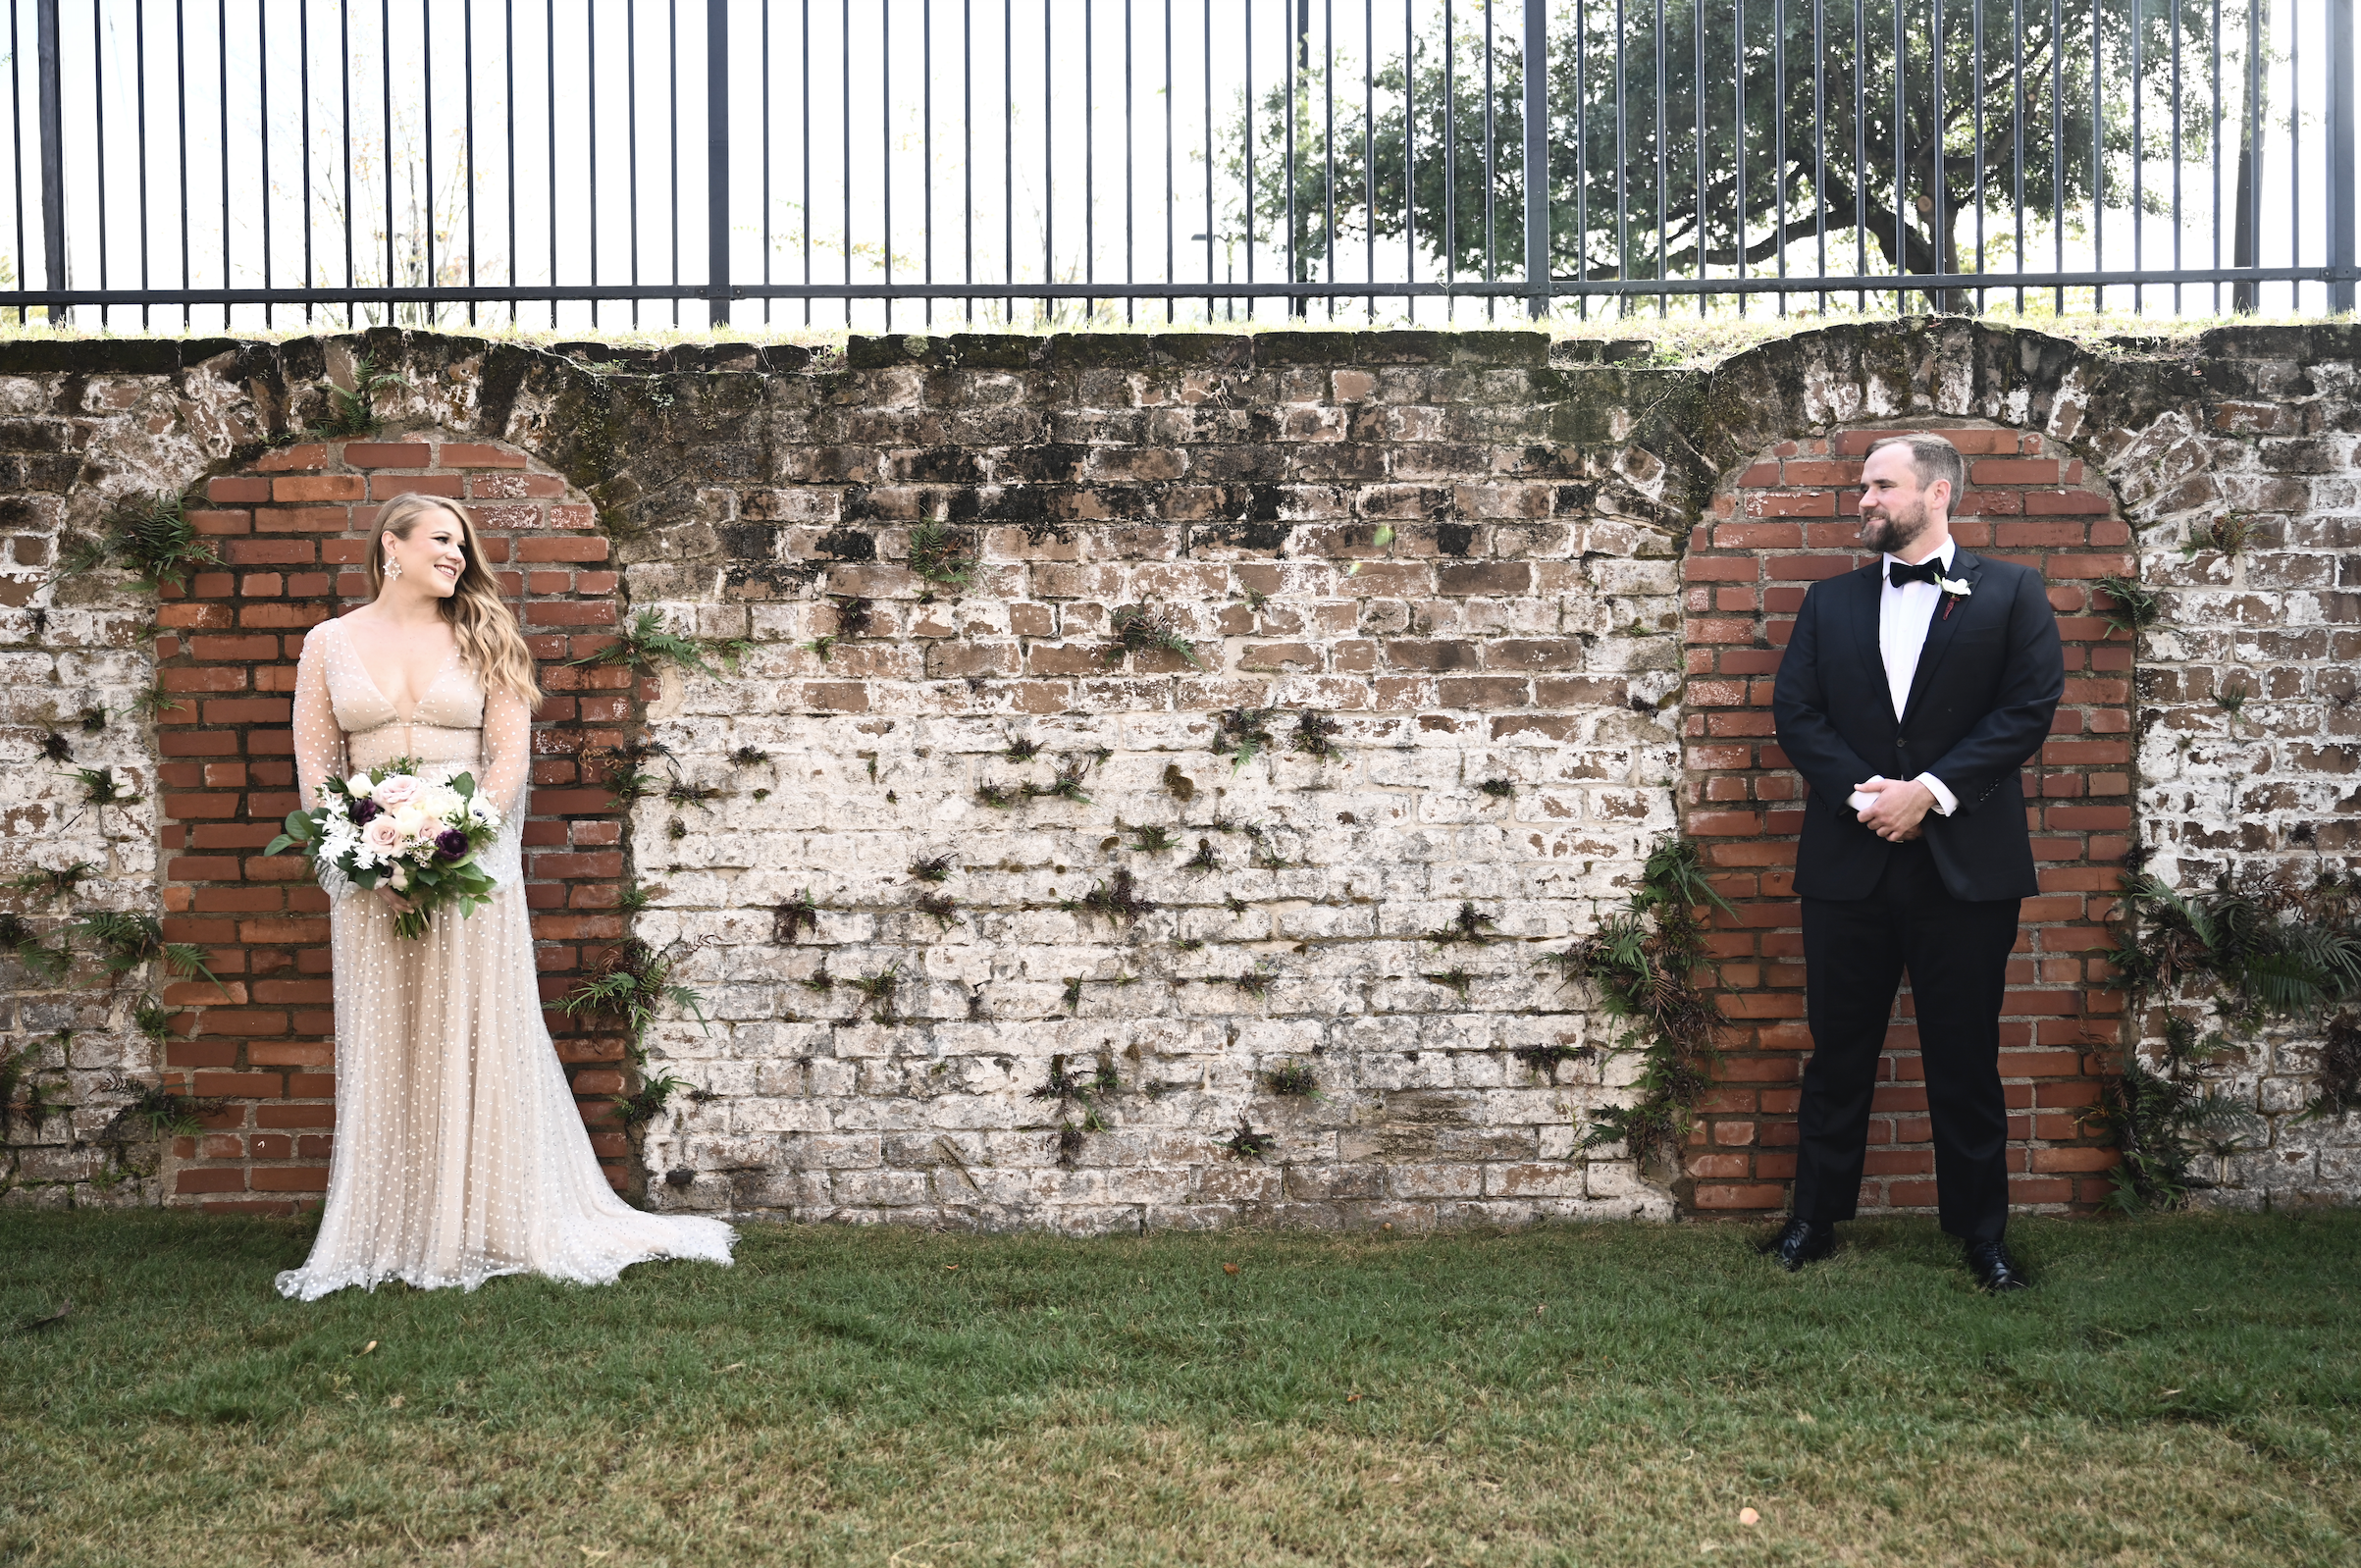 mckenna-and-isaacs-romantic-vintage-inspired-savannah-wedding-at-the-georgia-state-railroad-museum-planned-by-savannah-wedding-planner-ivory-and-beau-savannah-wedding-coordinator-georgia-wedding-planner-destination-wedding-planner-4.png